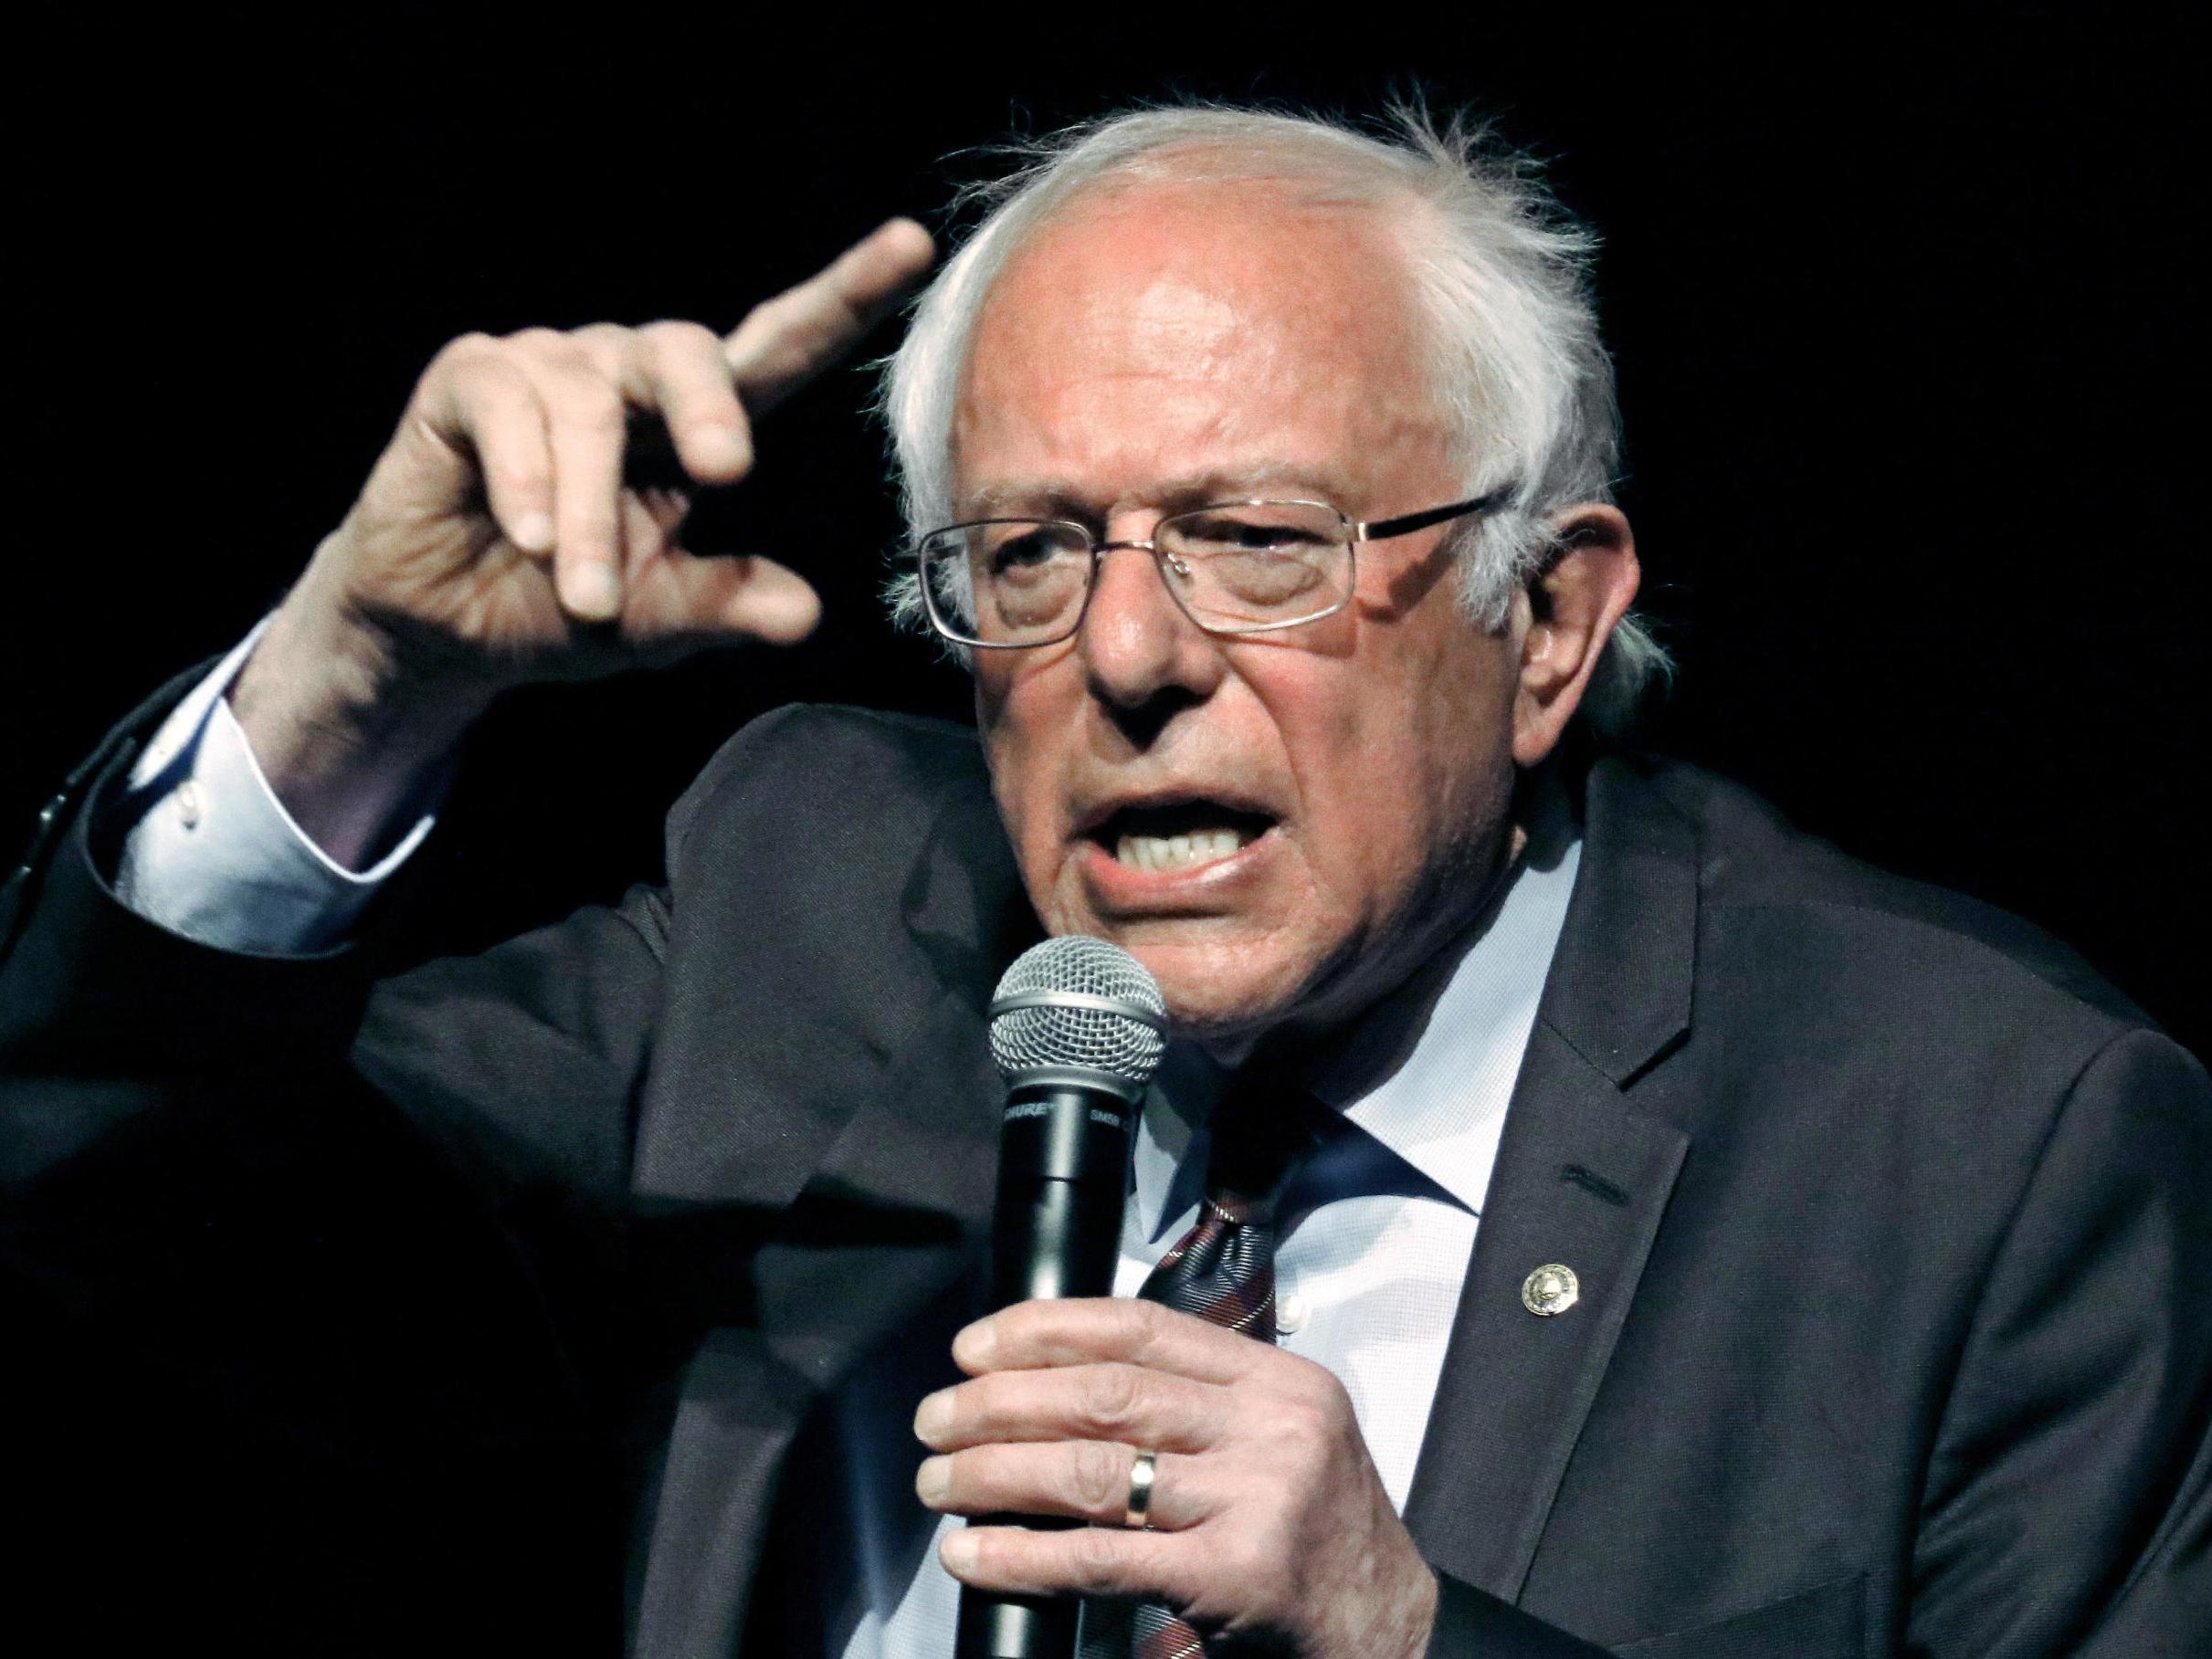 Born in 1941, Bernie Sanders is a younger member of the silent generation